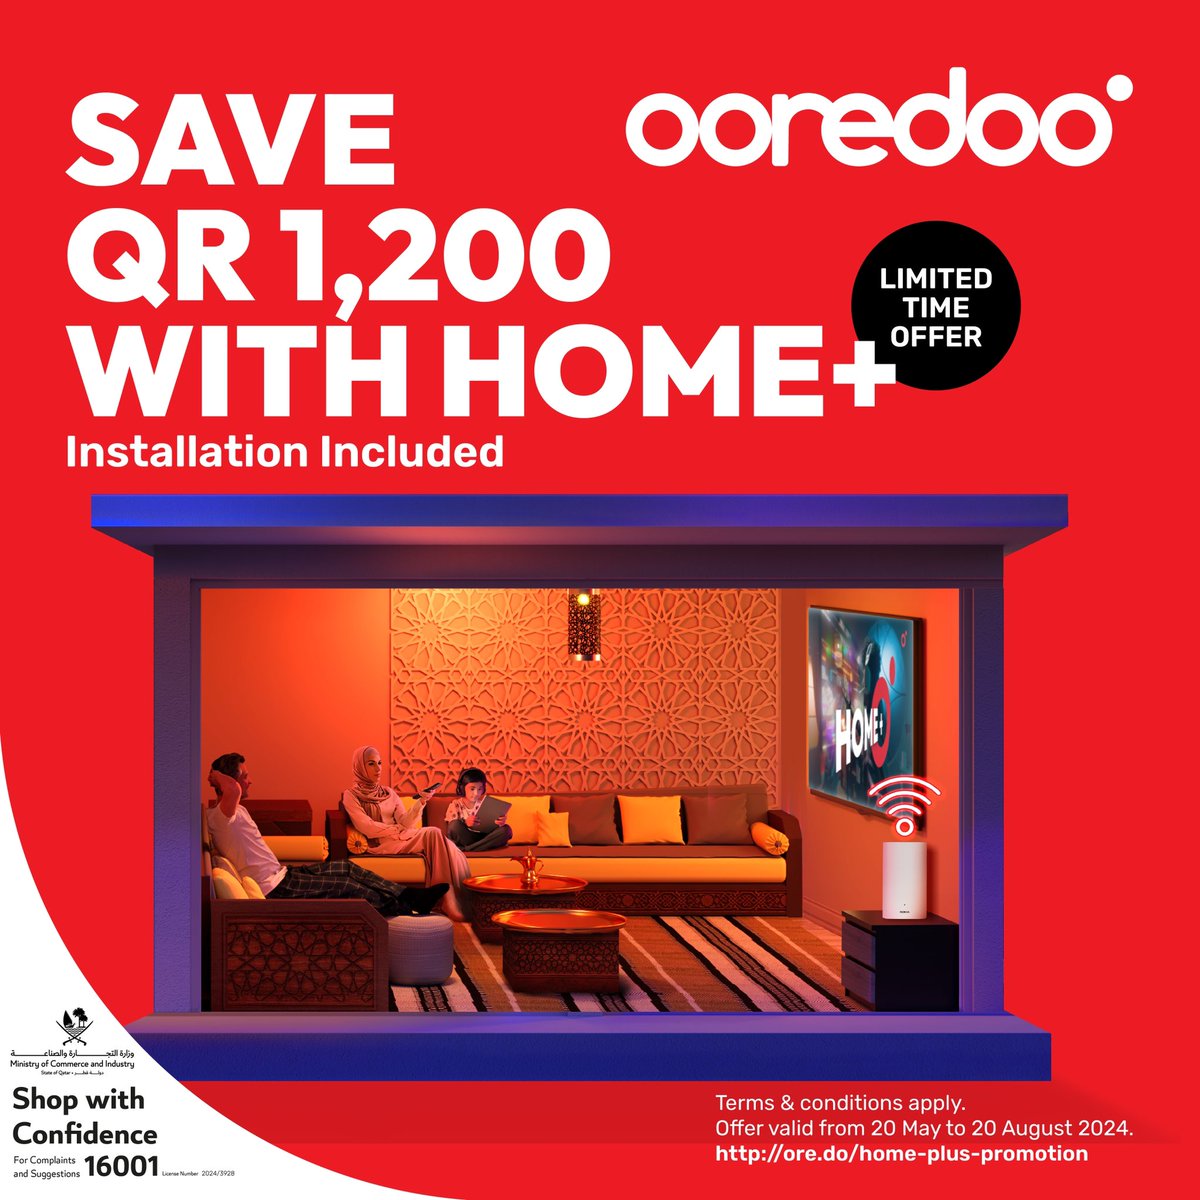 🔴 Summer just got a whole lot cooler with our sensational savings on select Home+ packages this season. Stay connected at super-fast speeds and enjoy some of the season’s sensational sporting events—all while saving up to QR 1,200! Simply contact us via 111 or apply for Home+